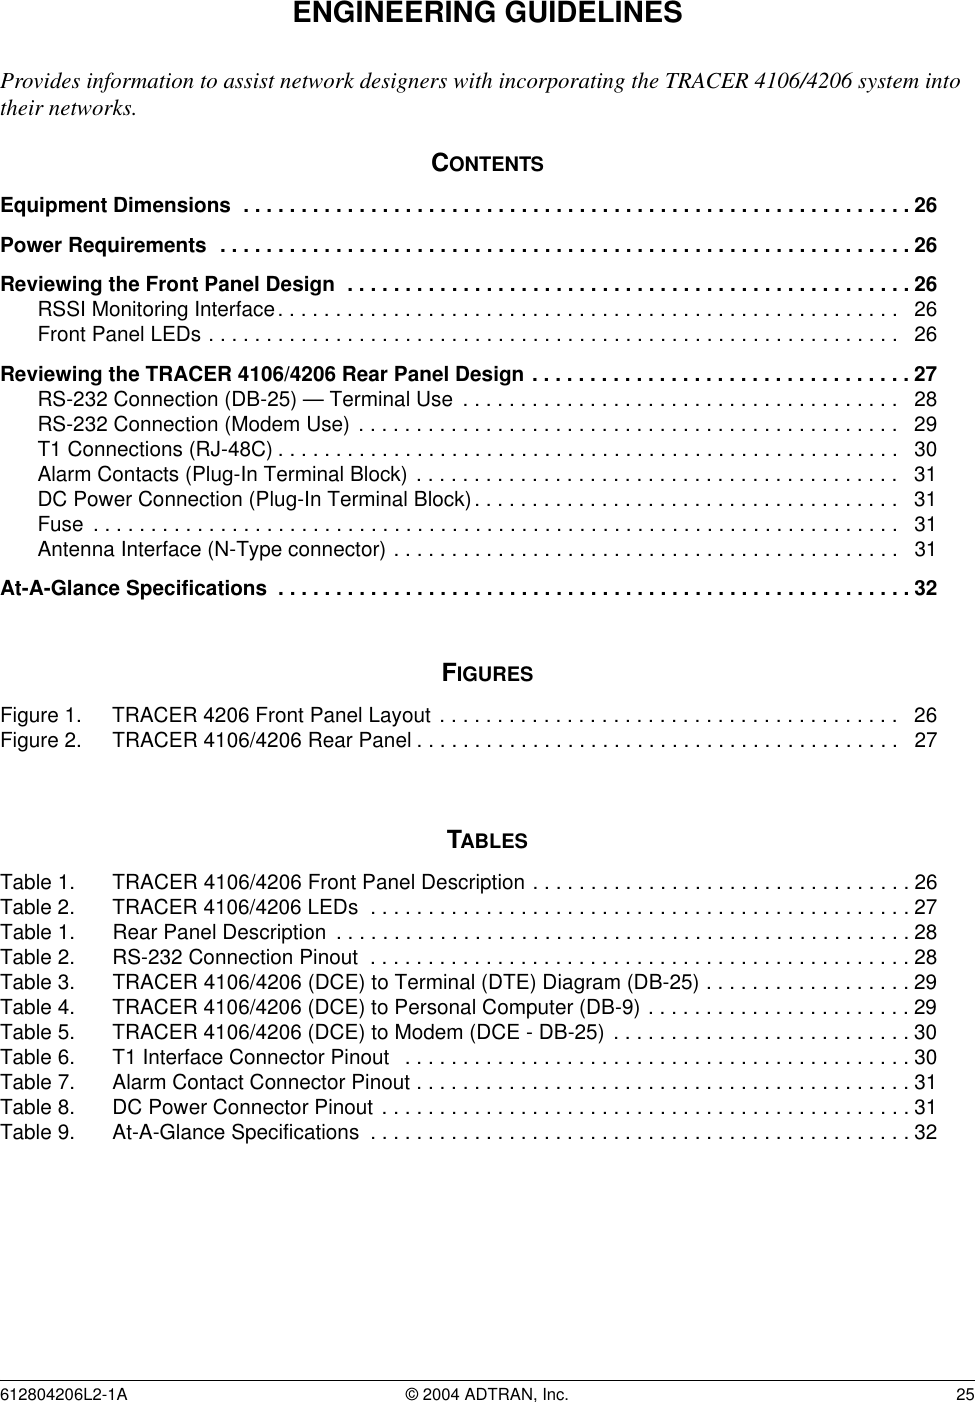 612804206L2-1A © 2004 ADTRAN, Inc.  25ENGINEERING GUIDELINESProvides information to assist network designers with incorporating the TRACER 4106/4206 system into their networks.CONTENTSEquipment Dimensions  . . . . . . . . . . . . . . . . . . . . . . . . . . . . . . . . . . . . . . . . . . . . . . . . . . . . . . . . . . 26Power Requirements  . . . . . . . . . . . . . . . . . . . . . . . . . . . . . . . . . . . . . . . . . . . . . . . . . . . . . . . . . . . . 26Reviewing the Front Panel Design  . . . . . . . . . . . . . . . . . . . . . . . . . . . . . . . . . . . . . . . . . . . . . . . . . 26RSSI Monitoring Interface. . . . . . . . . . . . . . . . . . . . . . . . . . . . . . . . . . . . . . . . . . . . . . . . . . . . . .   26Front Panel LEDs . . . . . . . . . . . . . . . . . . . . . . . . . . . . . . . . . . . . . . . . . . . . . . . . . . . . . . . . . . . .   26Reviewing the TRACER 4106/4206 Rear Panel Design . . . . . . . . . . . . . . . . . . . . . . . . . . . . . . . . . 27RS-232 Connection (DB-25) — Terminal Use  . . . . . . . . . . . . . . . . . . . . . . . . . . . . . . . . . . . . . .   28RS-232 Connection (Modem Use) . . . . . . . . . . . . . . . . . . . . . . . . . . . . . . . . . . . . . . . . . . . . . . .   29T1 Connections (RJ-48C) . . . . . . . . . . . . . . . . . . . . . . . . . . . . . . . . . . . . . . . . . . . . . . . . . . . . . .   30Alarm Contacts (Plug-In Terminal Block) . . . . . . . . . . . . . . . . . . . . . . . . . . . . . . . . . . . . . . . . . .   31DC Power Connection (Plug-In Terminal Block). . . . . . . . . . . . . . . . . . . . . . . . . . . . . . . . . . . . .   31Fuse  . . . . . . . . . . . . . . . . . . . . . . . . . . . . . . . . . . . . . . . . . . . . . . . . . . . . . . . . . . . . . . . . . . . . . .   31Antenna Interface (N-Type connector) . . . . . . . . . . . . . . . . . . . . . . . . . . . . . . . . . . . . . . . . . . . .   31At-A-Glance Specifications  . . . . . . . . . . . . . . . . . . . . . . . . . . . . . . . . . . . . . . . . . . . . . . . . . . . . . . . 32FIGURESFigure 1. TRACER 4206 Front Panel Layout . . . . . . . . . . . . . . . . . . . . . . . . . . . . . . . . . . . . . . . .   26Figure 2. TRACER 4106/4206 Rear Panel . . . . . . . . . . . . . . . . . . . . . . . . . . . . . . . . . . . . . . . . . .   27TABLESTable 1. TRACER 4106/4206 Front Panel Description . . . . . . . . . . . . . . . . . . . . . . . . . . . . . . . . . 26Table 2. TRACER 4106/4206 LEDs  . . . . . . . . . . . . . . . . . . . . . . . . . . . . . . . . . . . . . . . . . . . . . . . 27Table 1. Rear Panel Description  . . . . . . . . . . . . . . . . . . . . . . . . . . . . . . . . . . . . . . . . . . . . . . . . . . 28Table 2. RS-232 Connection Pinout  . . . . . . . . . . . . . . . . . . . . . . . . . . . . . . . . . . . . . . . . . . . . . . . 28Table 3. TRACER 4106/4206 (DCE) to Terminal (DTE) Diagram (DB-25) . . . . . . . . . . . . . . . . . . 29Table 4. TRACER 4106/4206 (DCE) to Personal Computer (DB-9) . . . . . . . . . . . . . . . . . . . . . . . 29Table 5. TRACER 4106/4206 (DCE) to Modem (DCE - DB-25)  . . . . . . . . . . . . . . . . . . . . . . . . . . 30Table 6. T1 Interface Connector Pinout   . . . . . . . . . . . . . . . . . . . . . . . . . . . . . . . . . . . . . . . . . . . . 30Table 7. Alarm Contact Connector Pinout . . . . . . . . . . . . . . . . . . . . . . . . . . . . . . . . . . . . . . . . . . . 31Table 8. DC Power Connector Pinout . . . . . . . . . . . . . . . . . . . . . . . . . . . . . . . . . . . . . . . . . . . . . . 31Table 9. At-A-Glance Specifications  . . . . . . . . . . . . . . . . . . . . . . . . . . . . . . . . . . . . . . . . . . . . . . .32